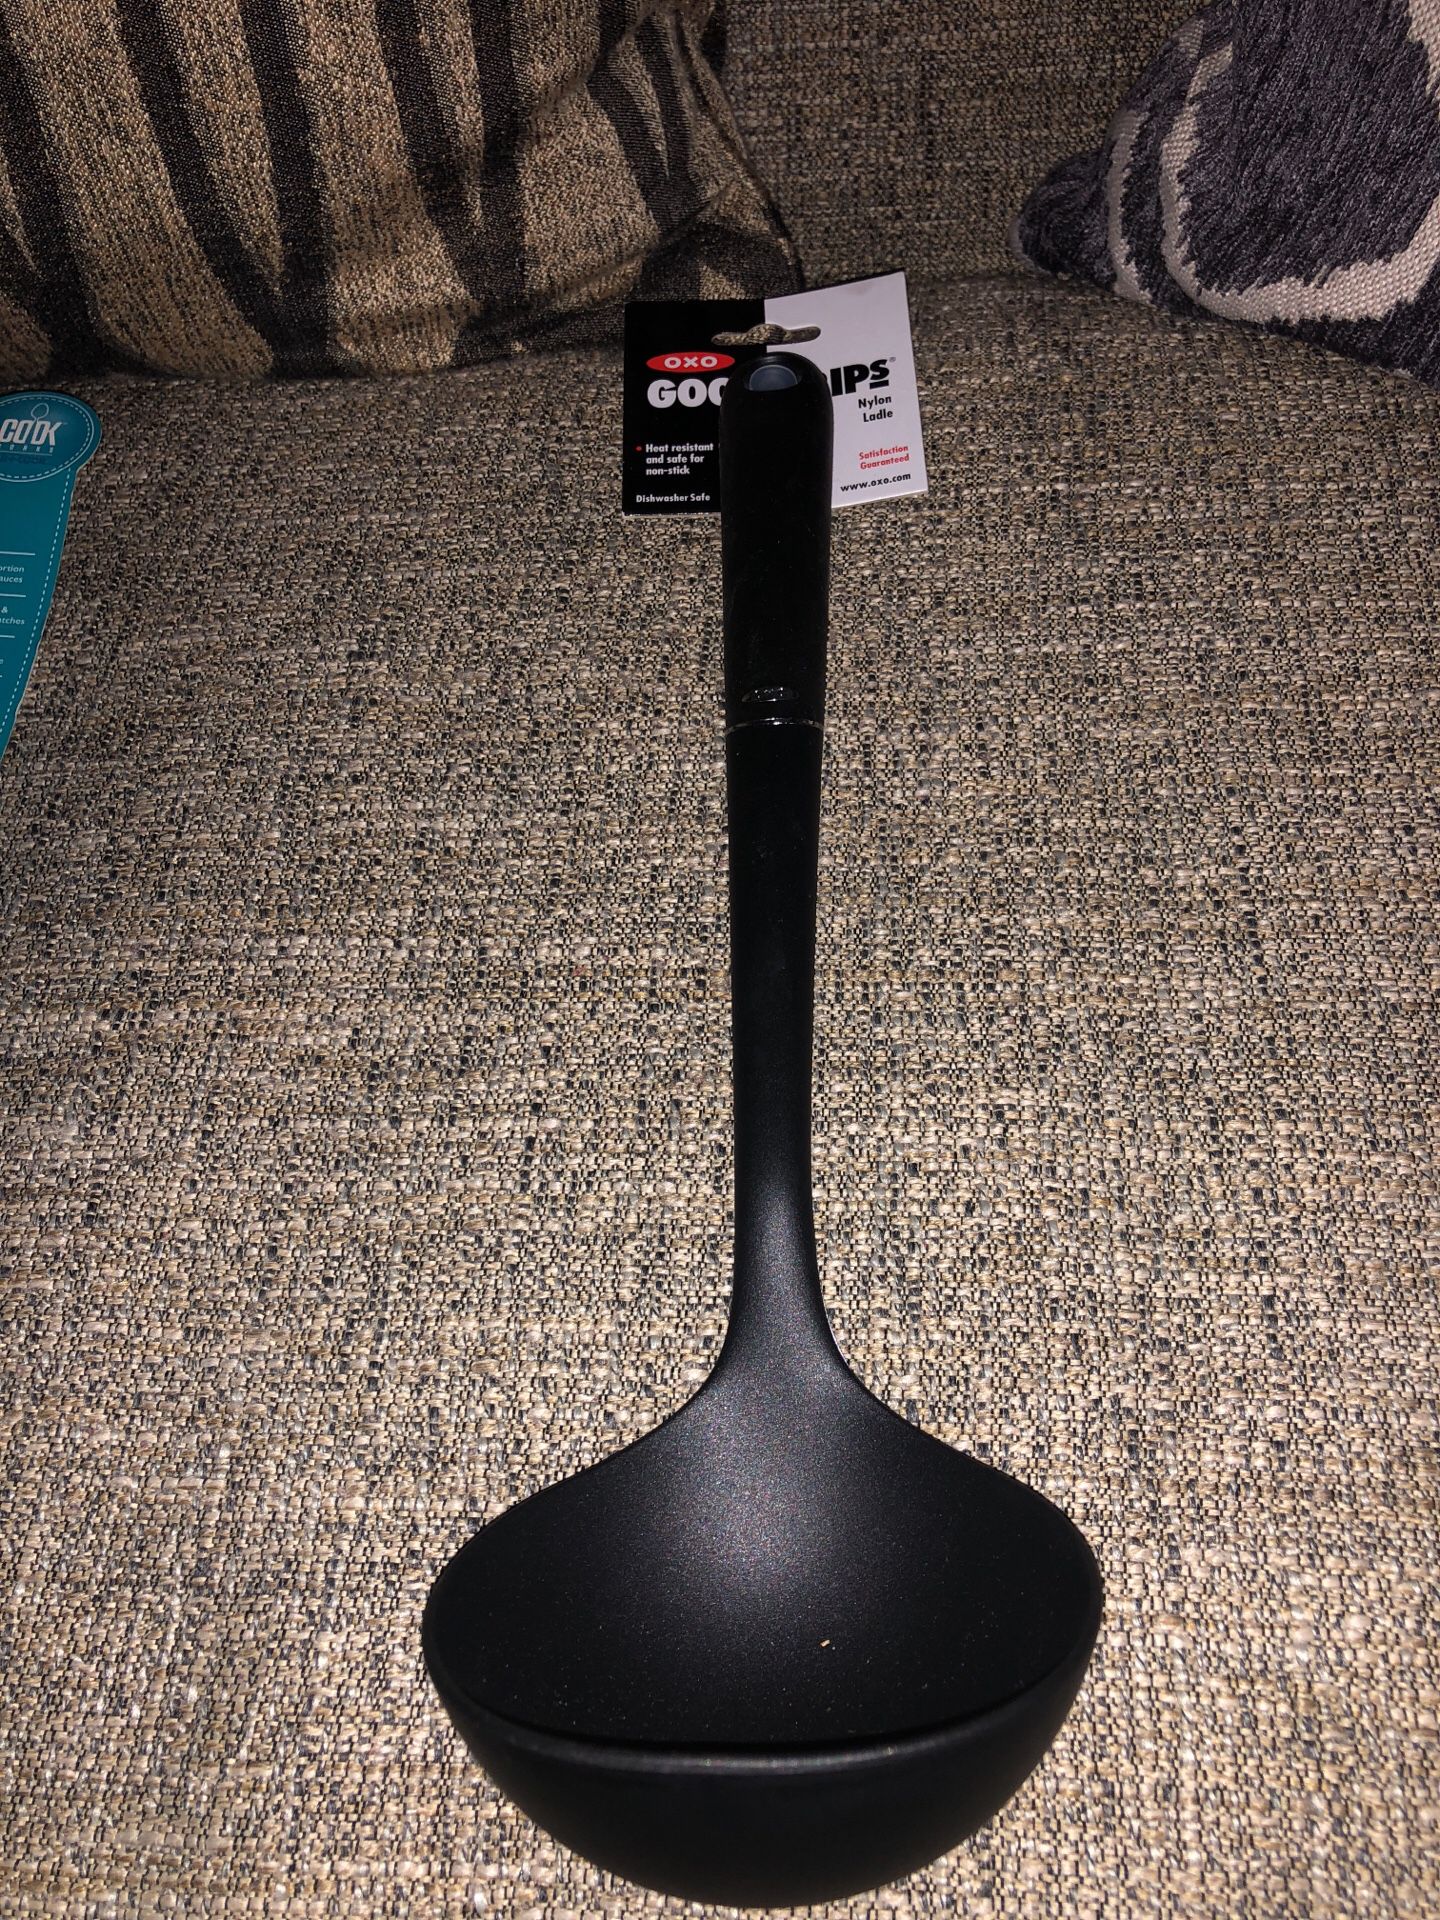 One serving spoon Brand Name Is OXO Soft grip. Please see all the pictures and read the description